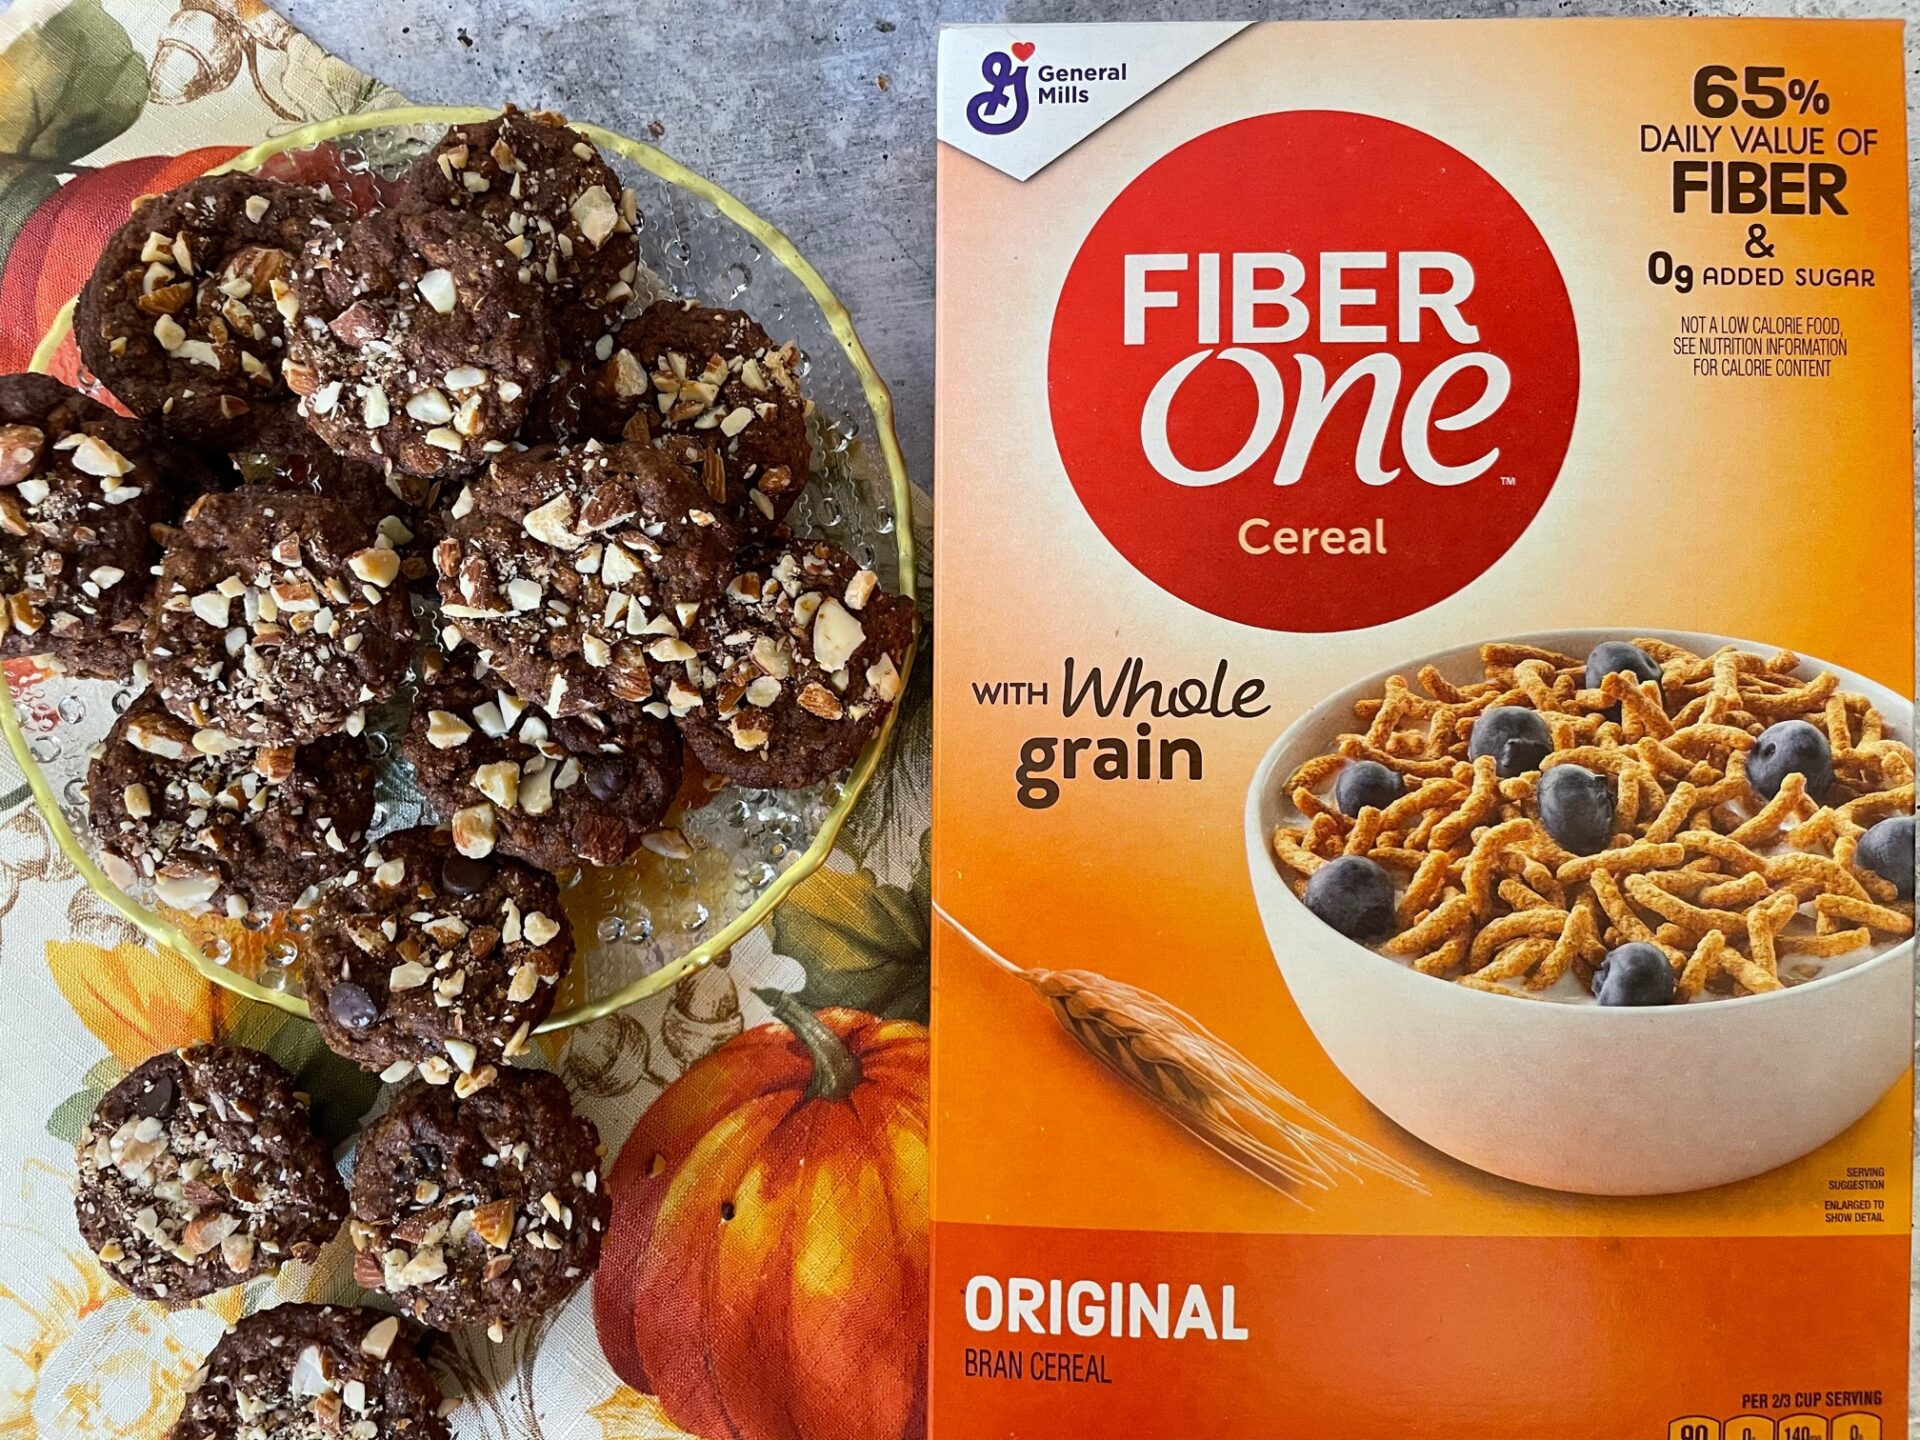 Fiber One Original Cereal Pumpkin Muffins | Whole grain, high fiber pumpkin muffins made with whole food ingredients! Perfect for a quick, convenient breakfast or nourishing sweet snack when you're on the go.